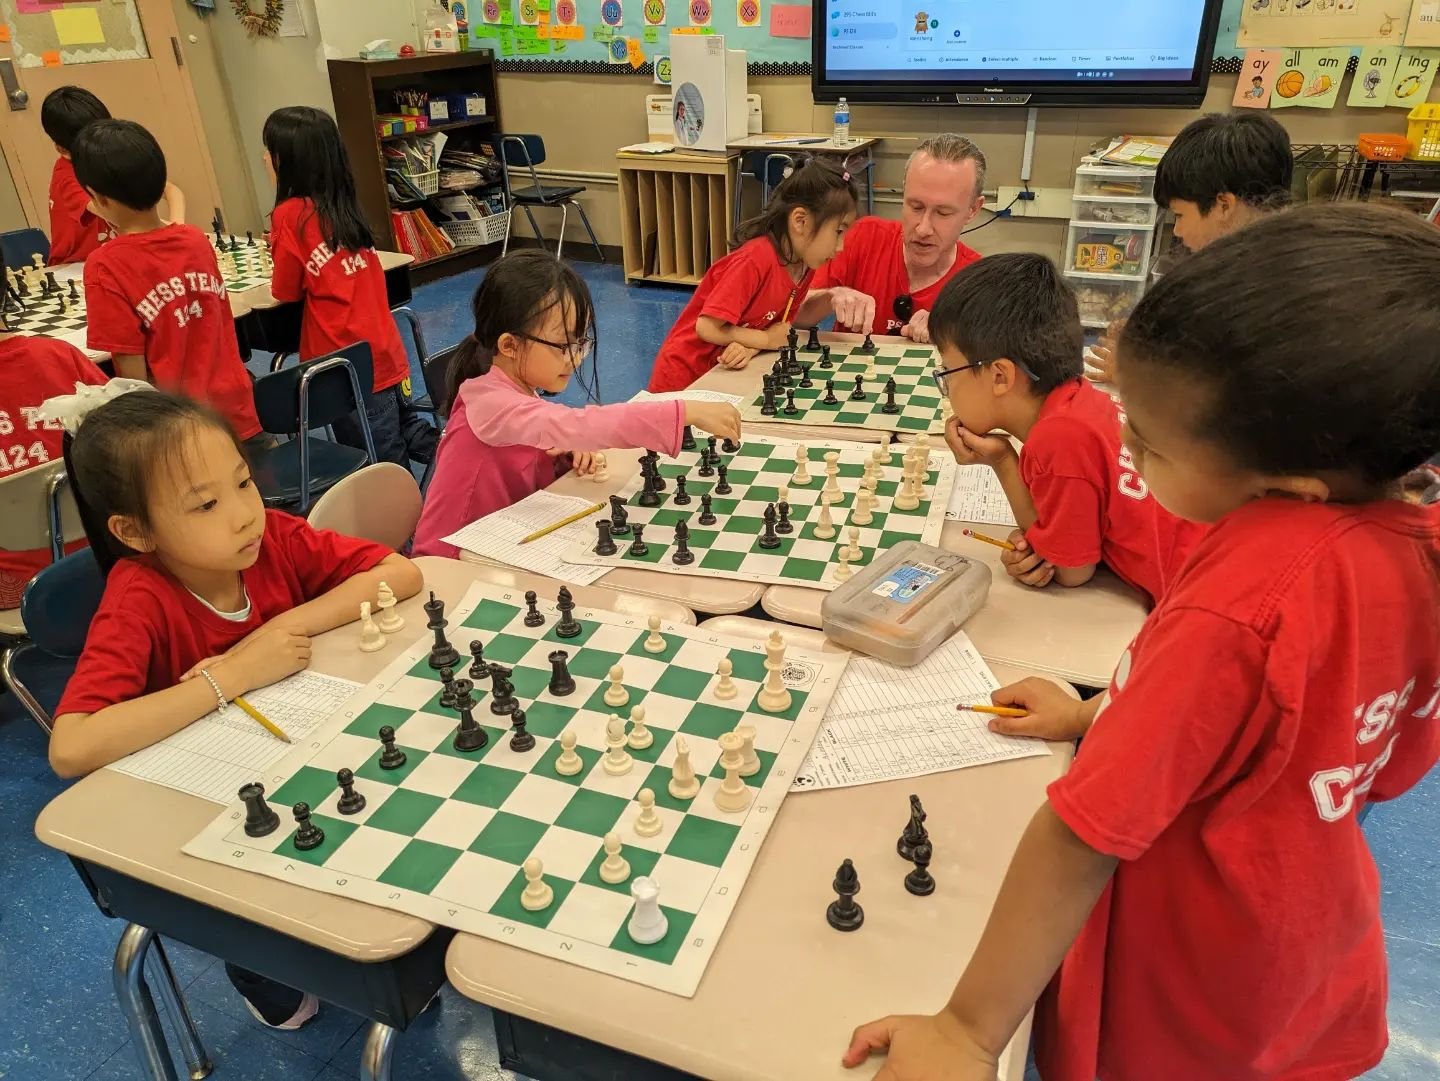 PS 124 @yungwing124 #tuesday #chess